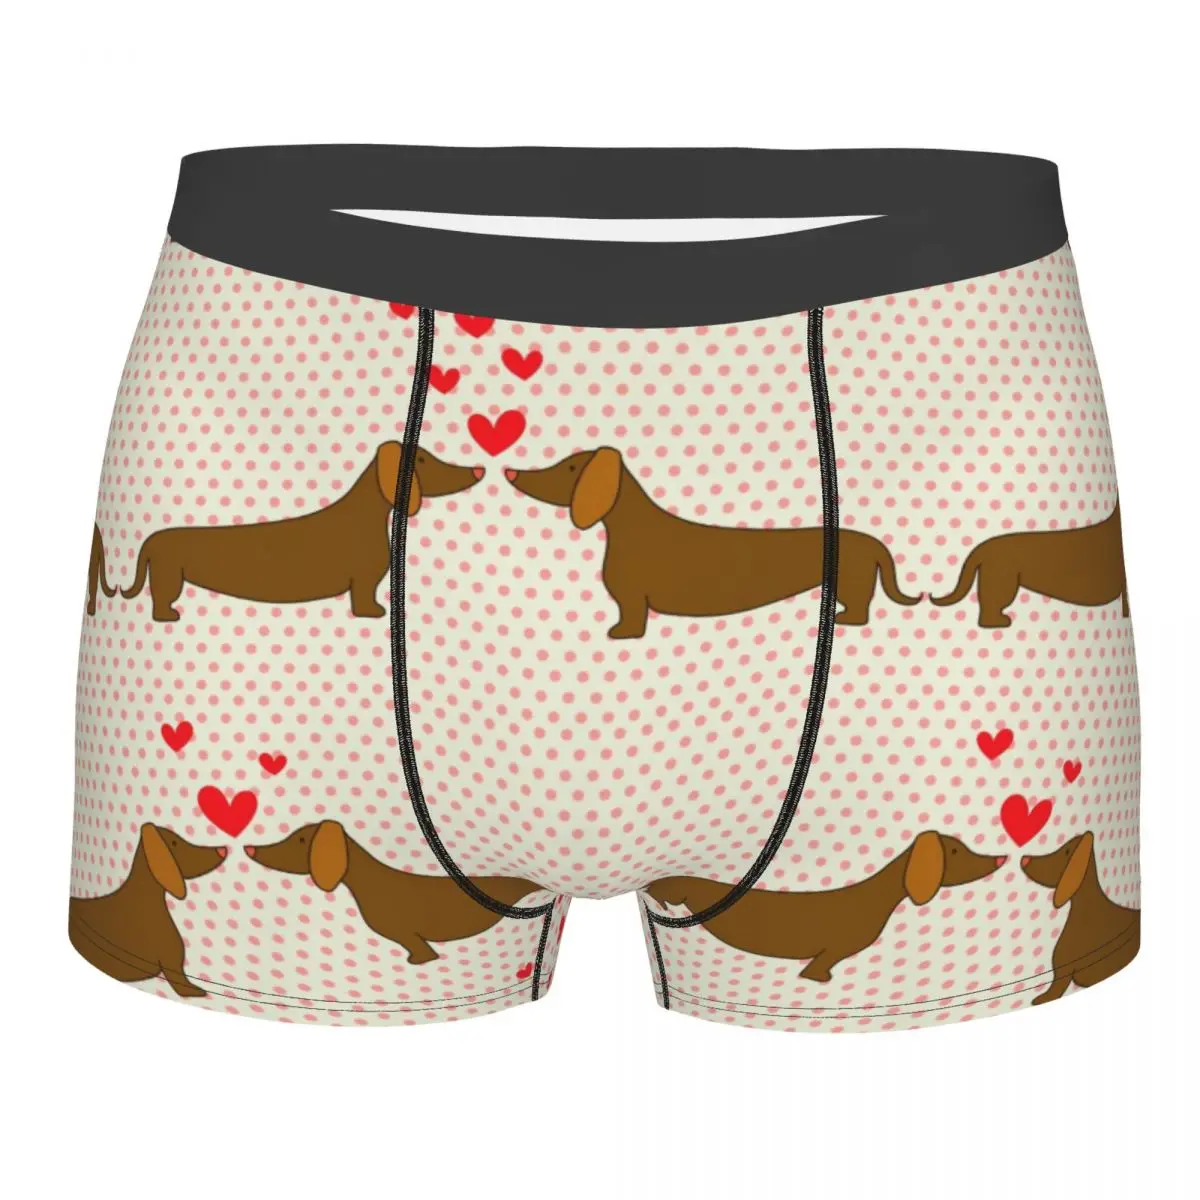 Men's Panties Underpants Boxers Underwear Lovely Dachshund Couples With Hearts Sexy Male Shorts